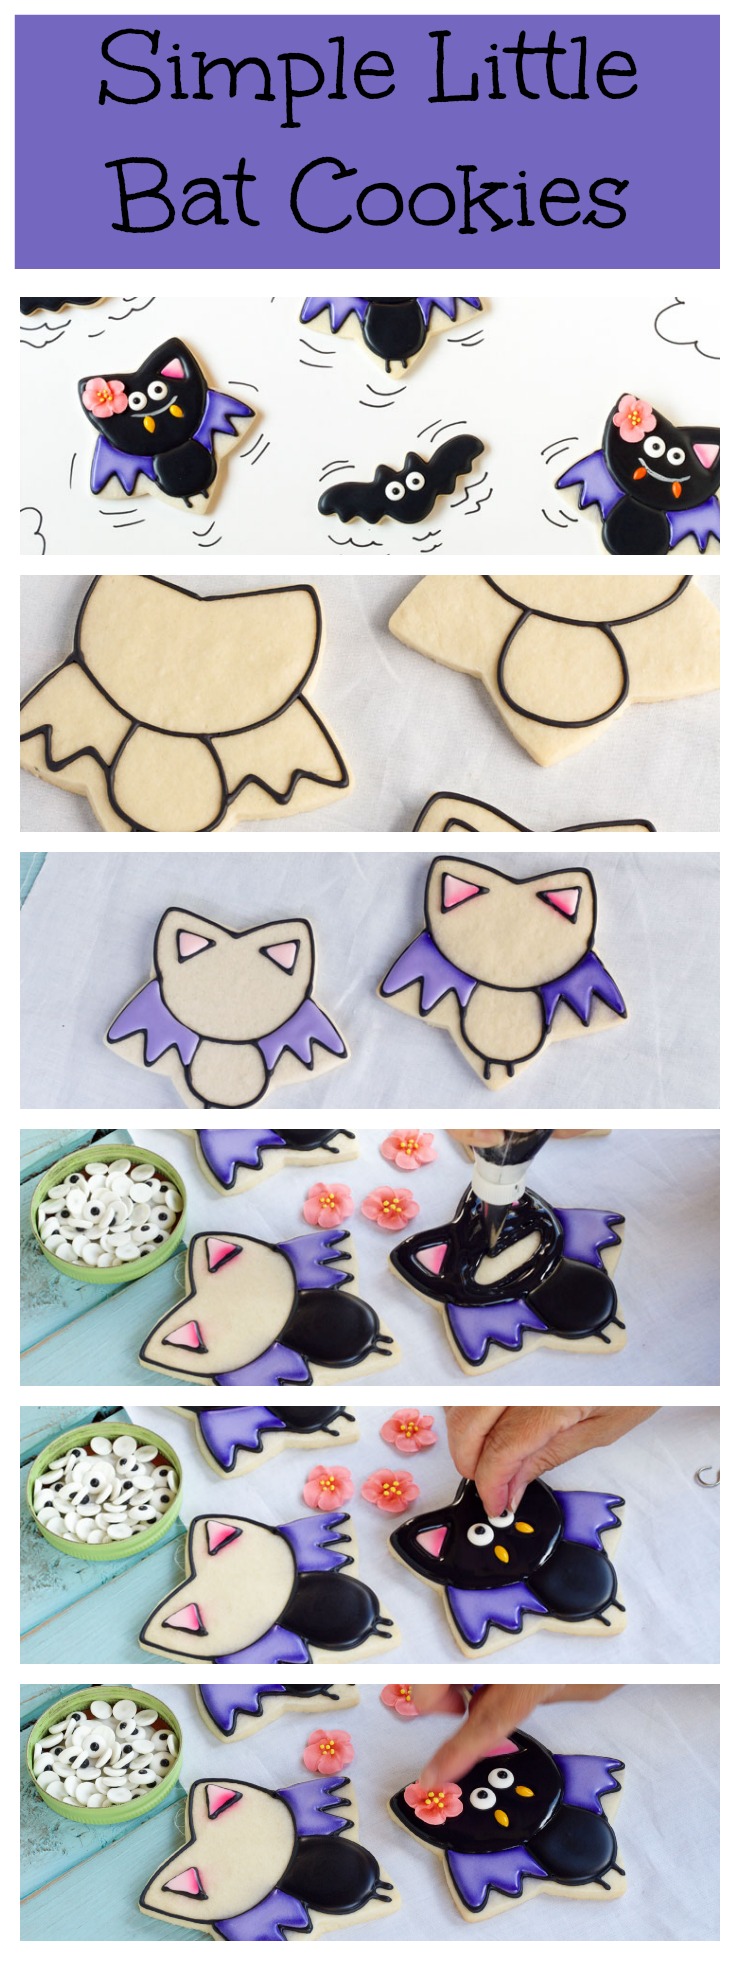 Simple Little Bat Cookies - Follow this simple tutorial to make these cute girl bats via thebearfootbaker.com